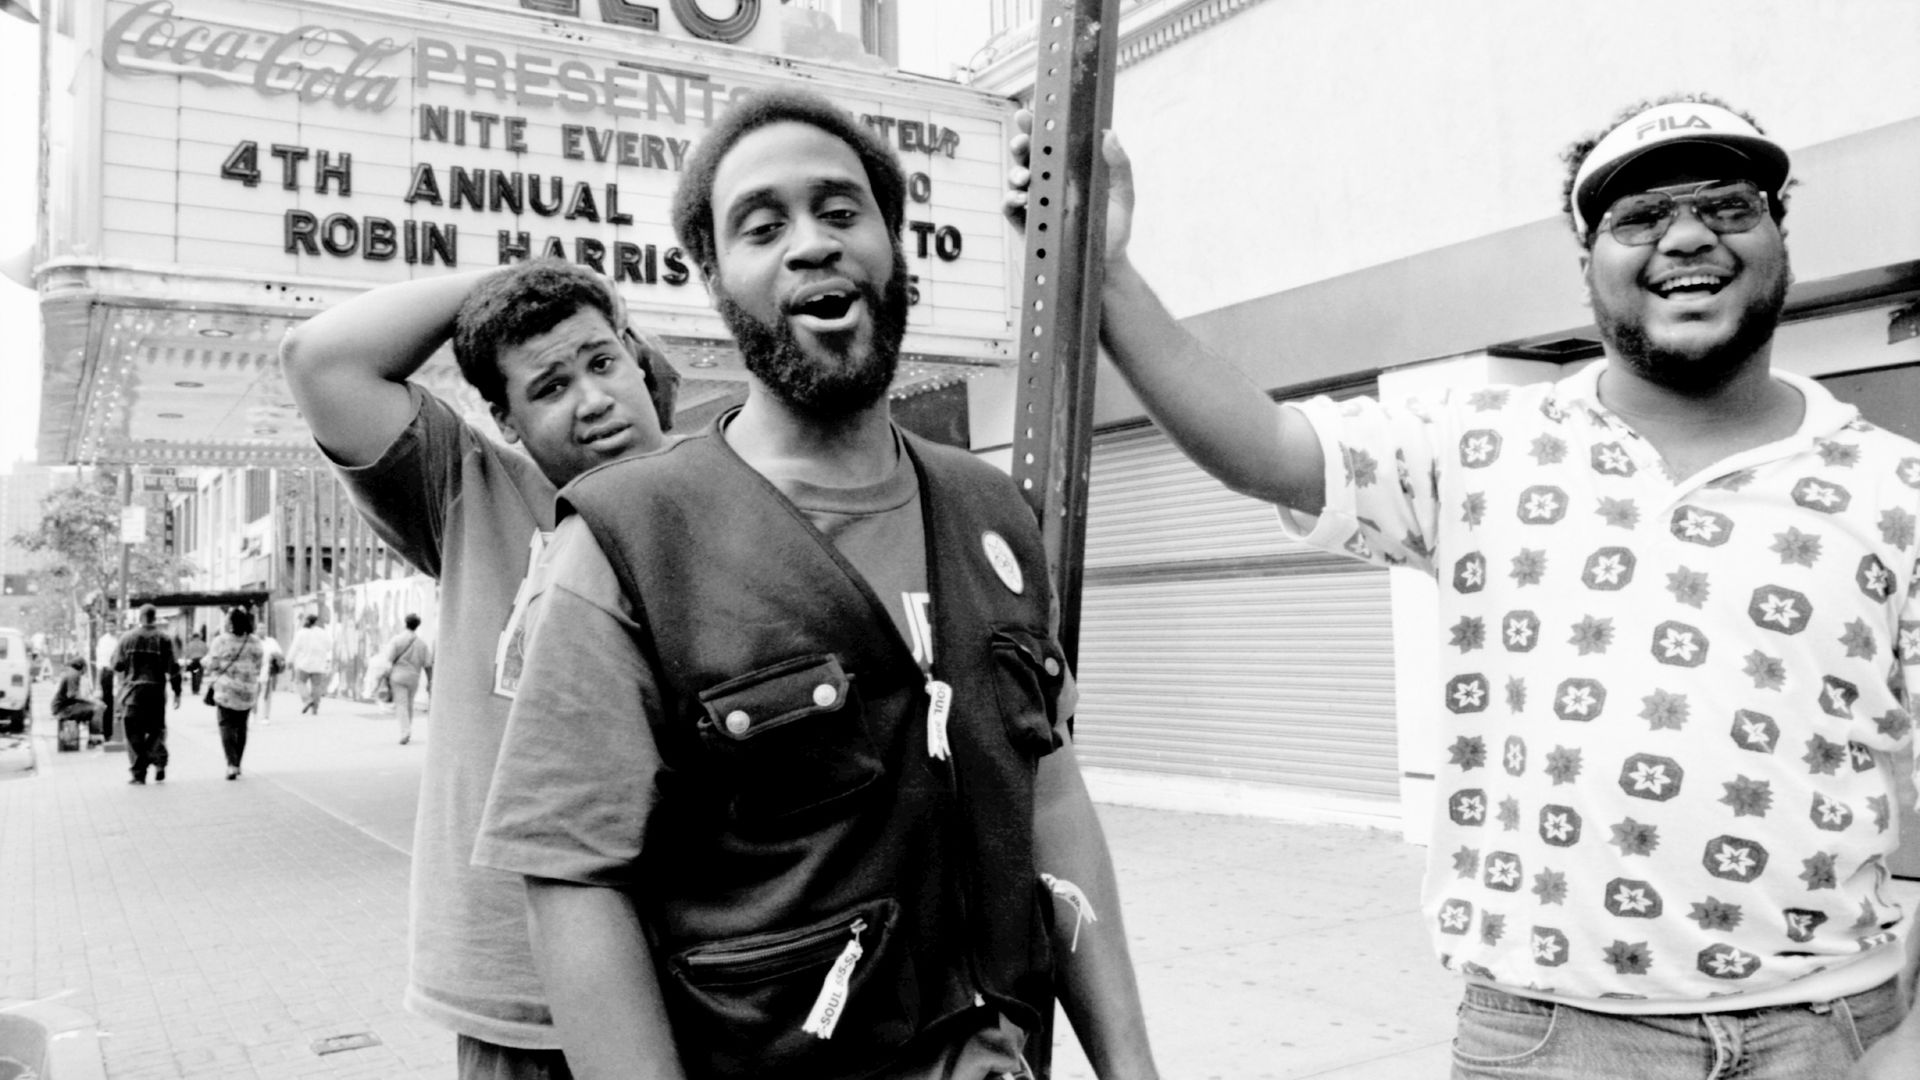 he hip hop trio De La Soul pose for a portrait outside the Apollo Theater in Harlem in September 1993 in New York City, New York. 